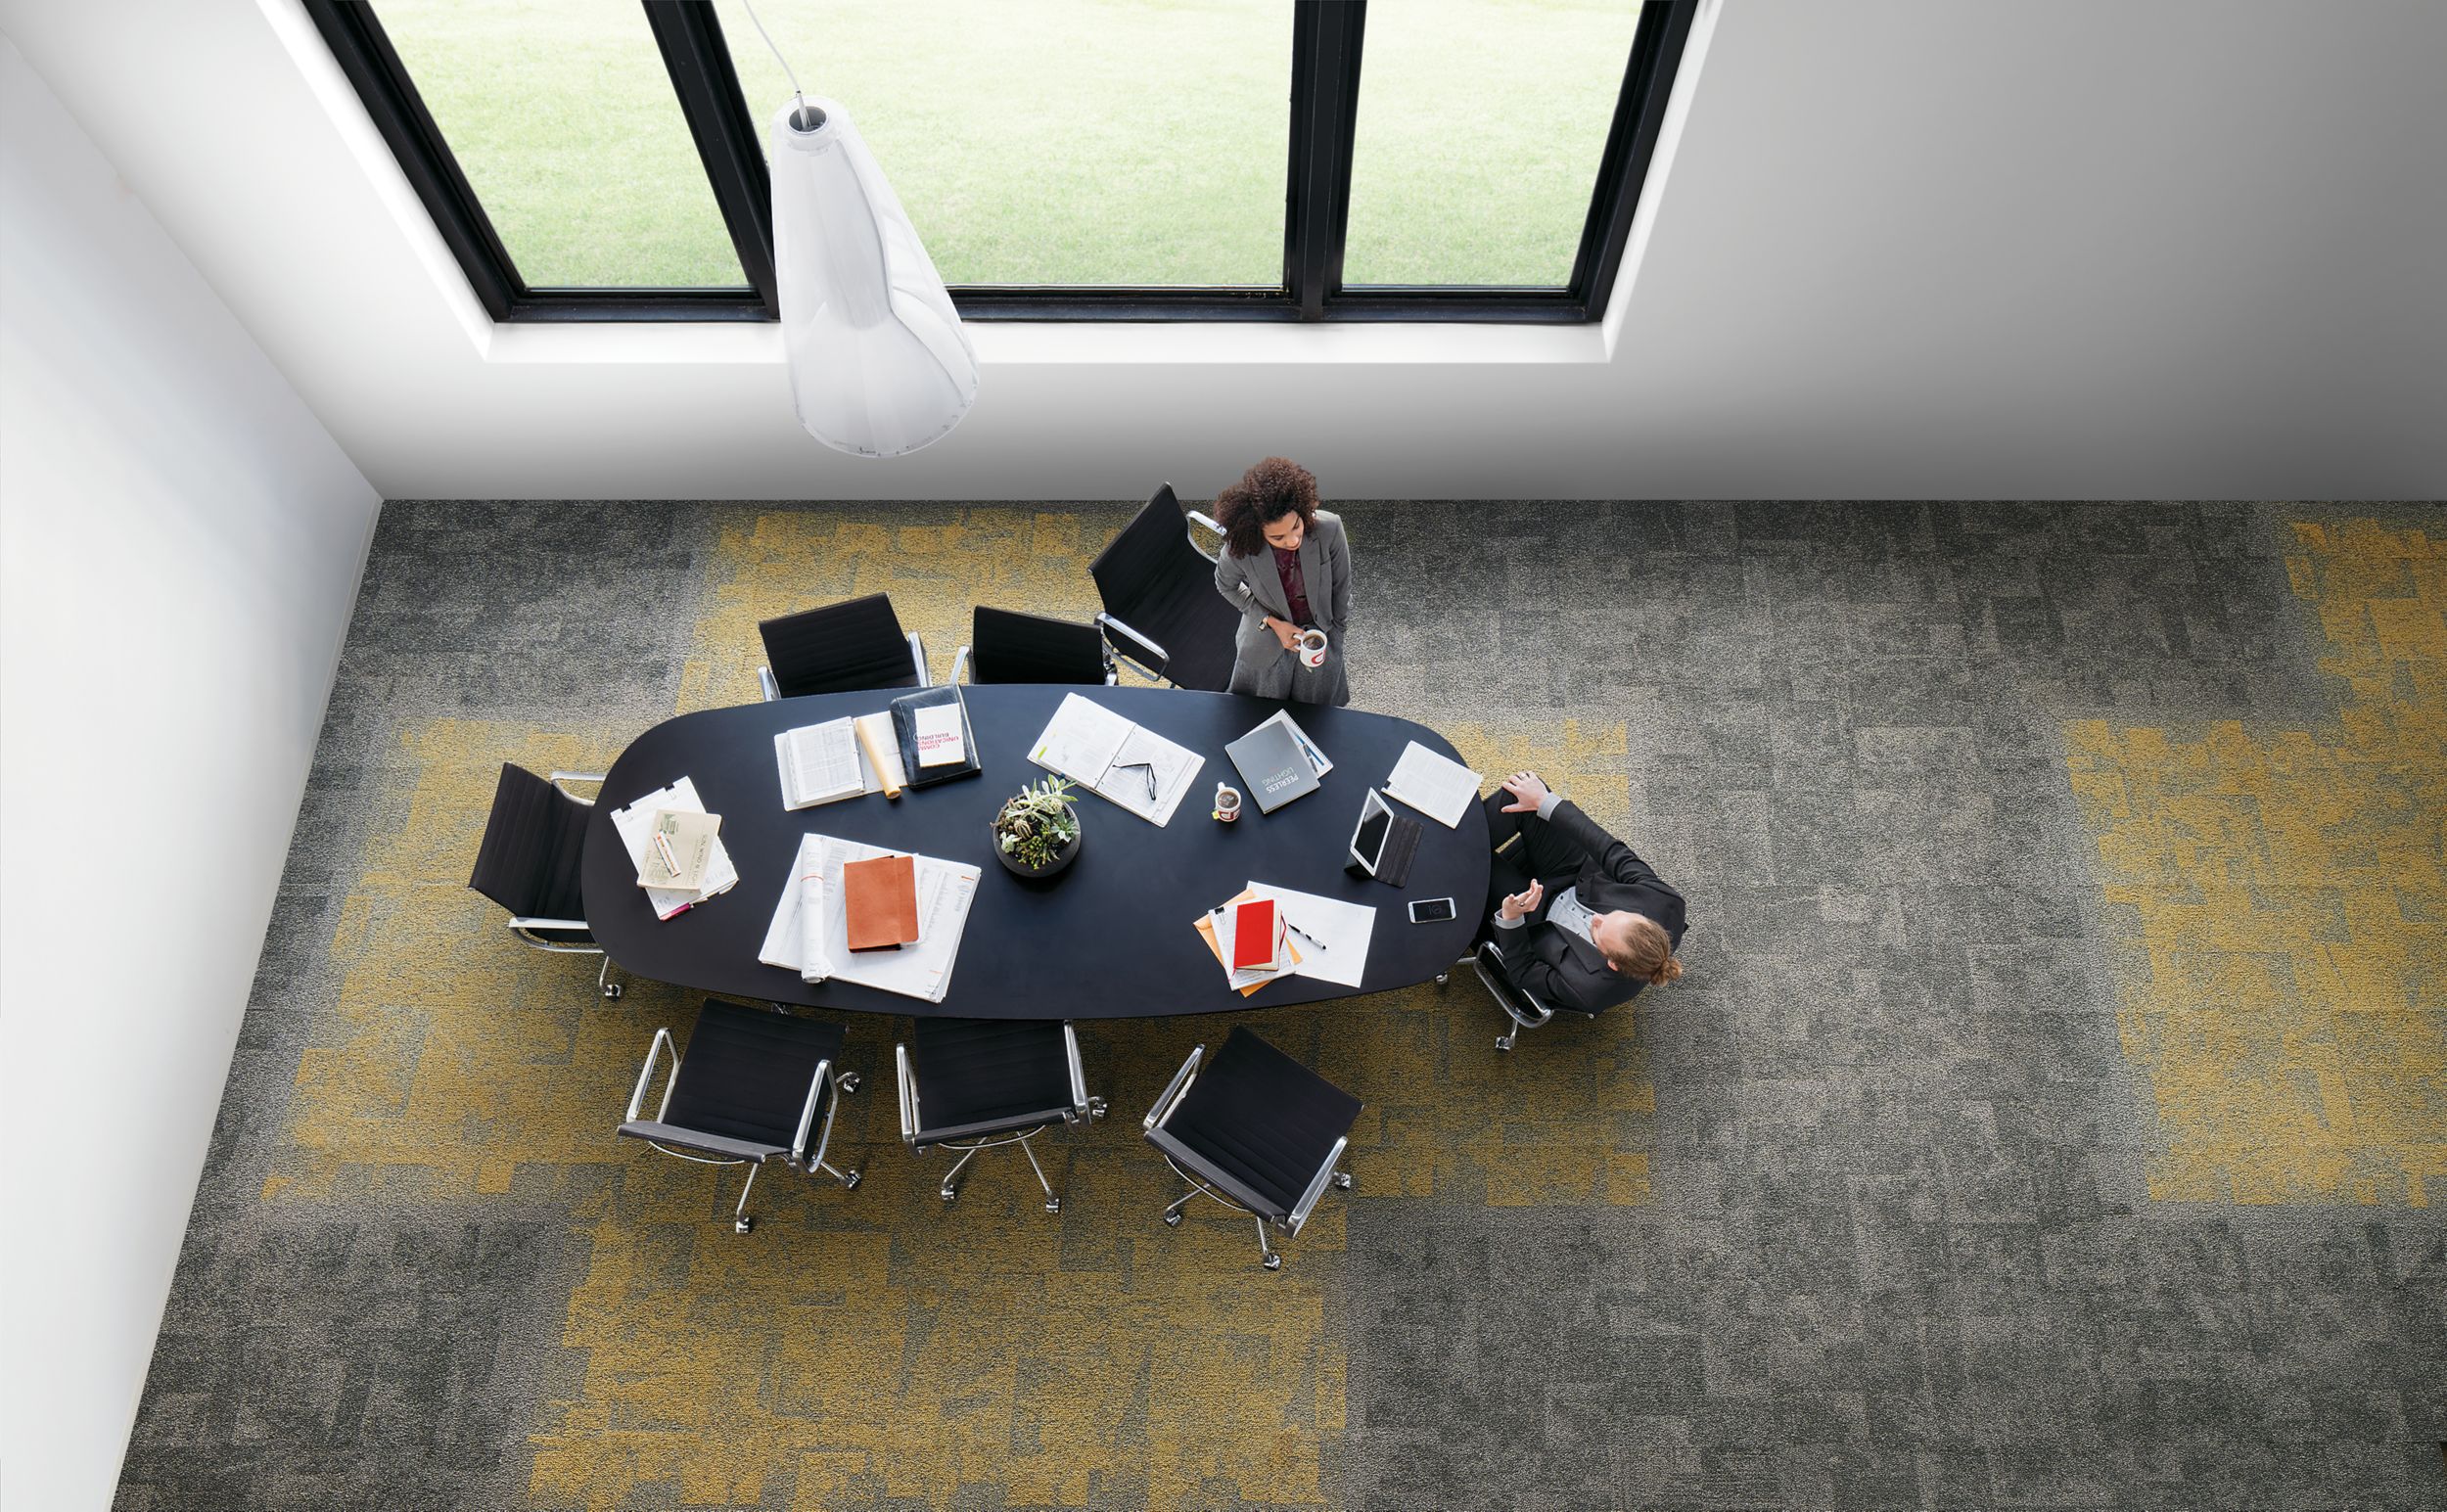 Interface Open Air 404 carpet tile in overhead view of meeting table with man and woman talking and drinking coffee image number 1